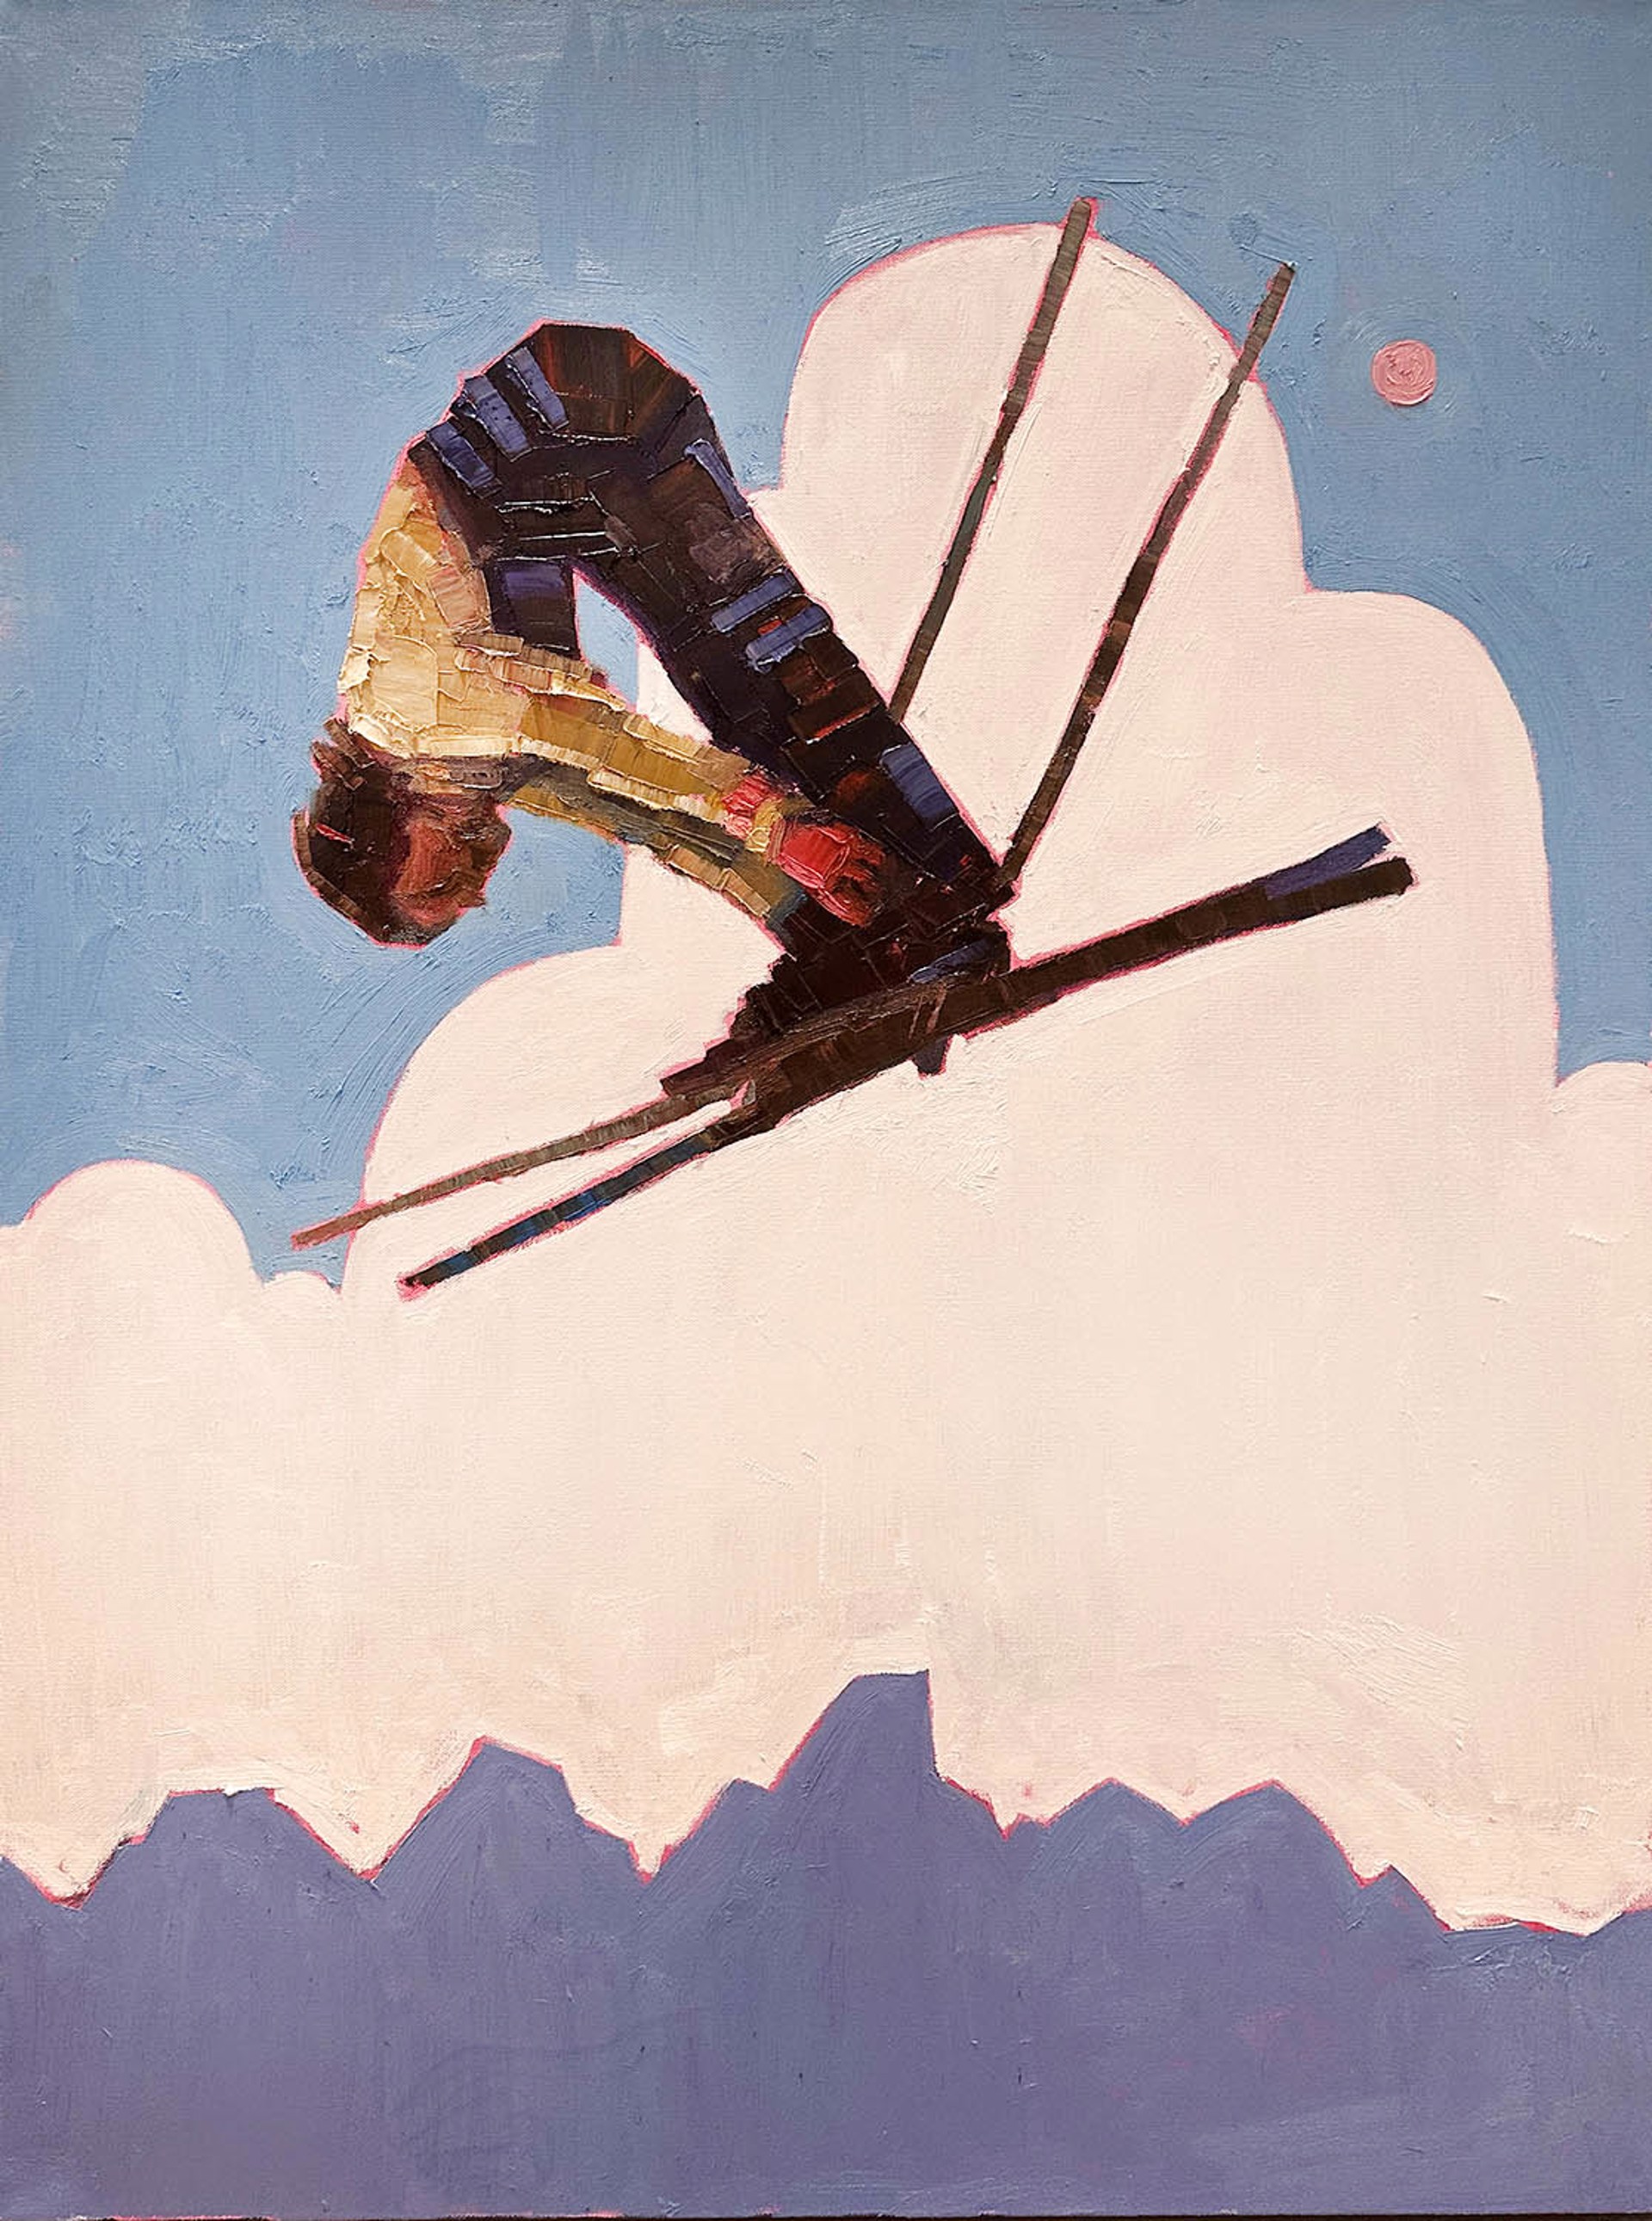 Original Oil Painting By Aaron Hazel Featuring A Female Skiier With Teton Mountain Range In The Background